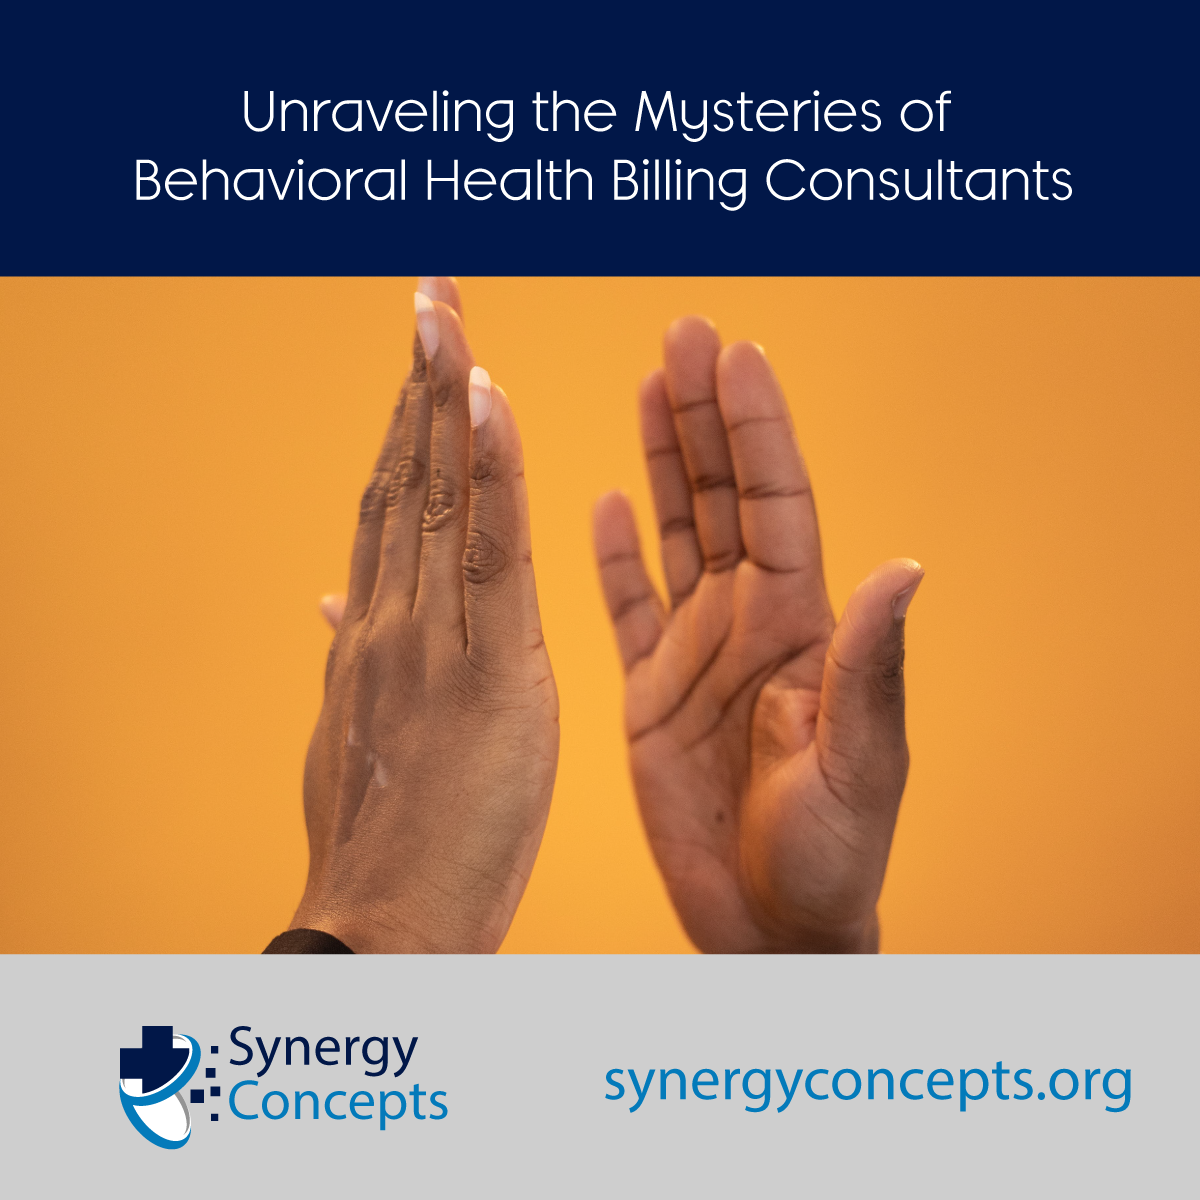 Unraveling the Mysteries of Behavioral Health Billing Consultants